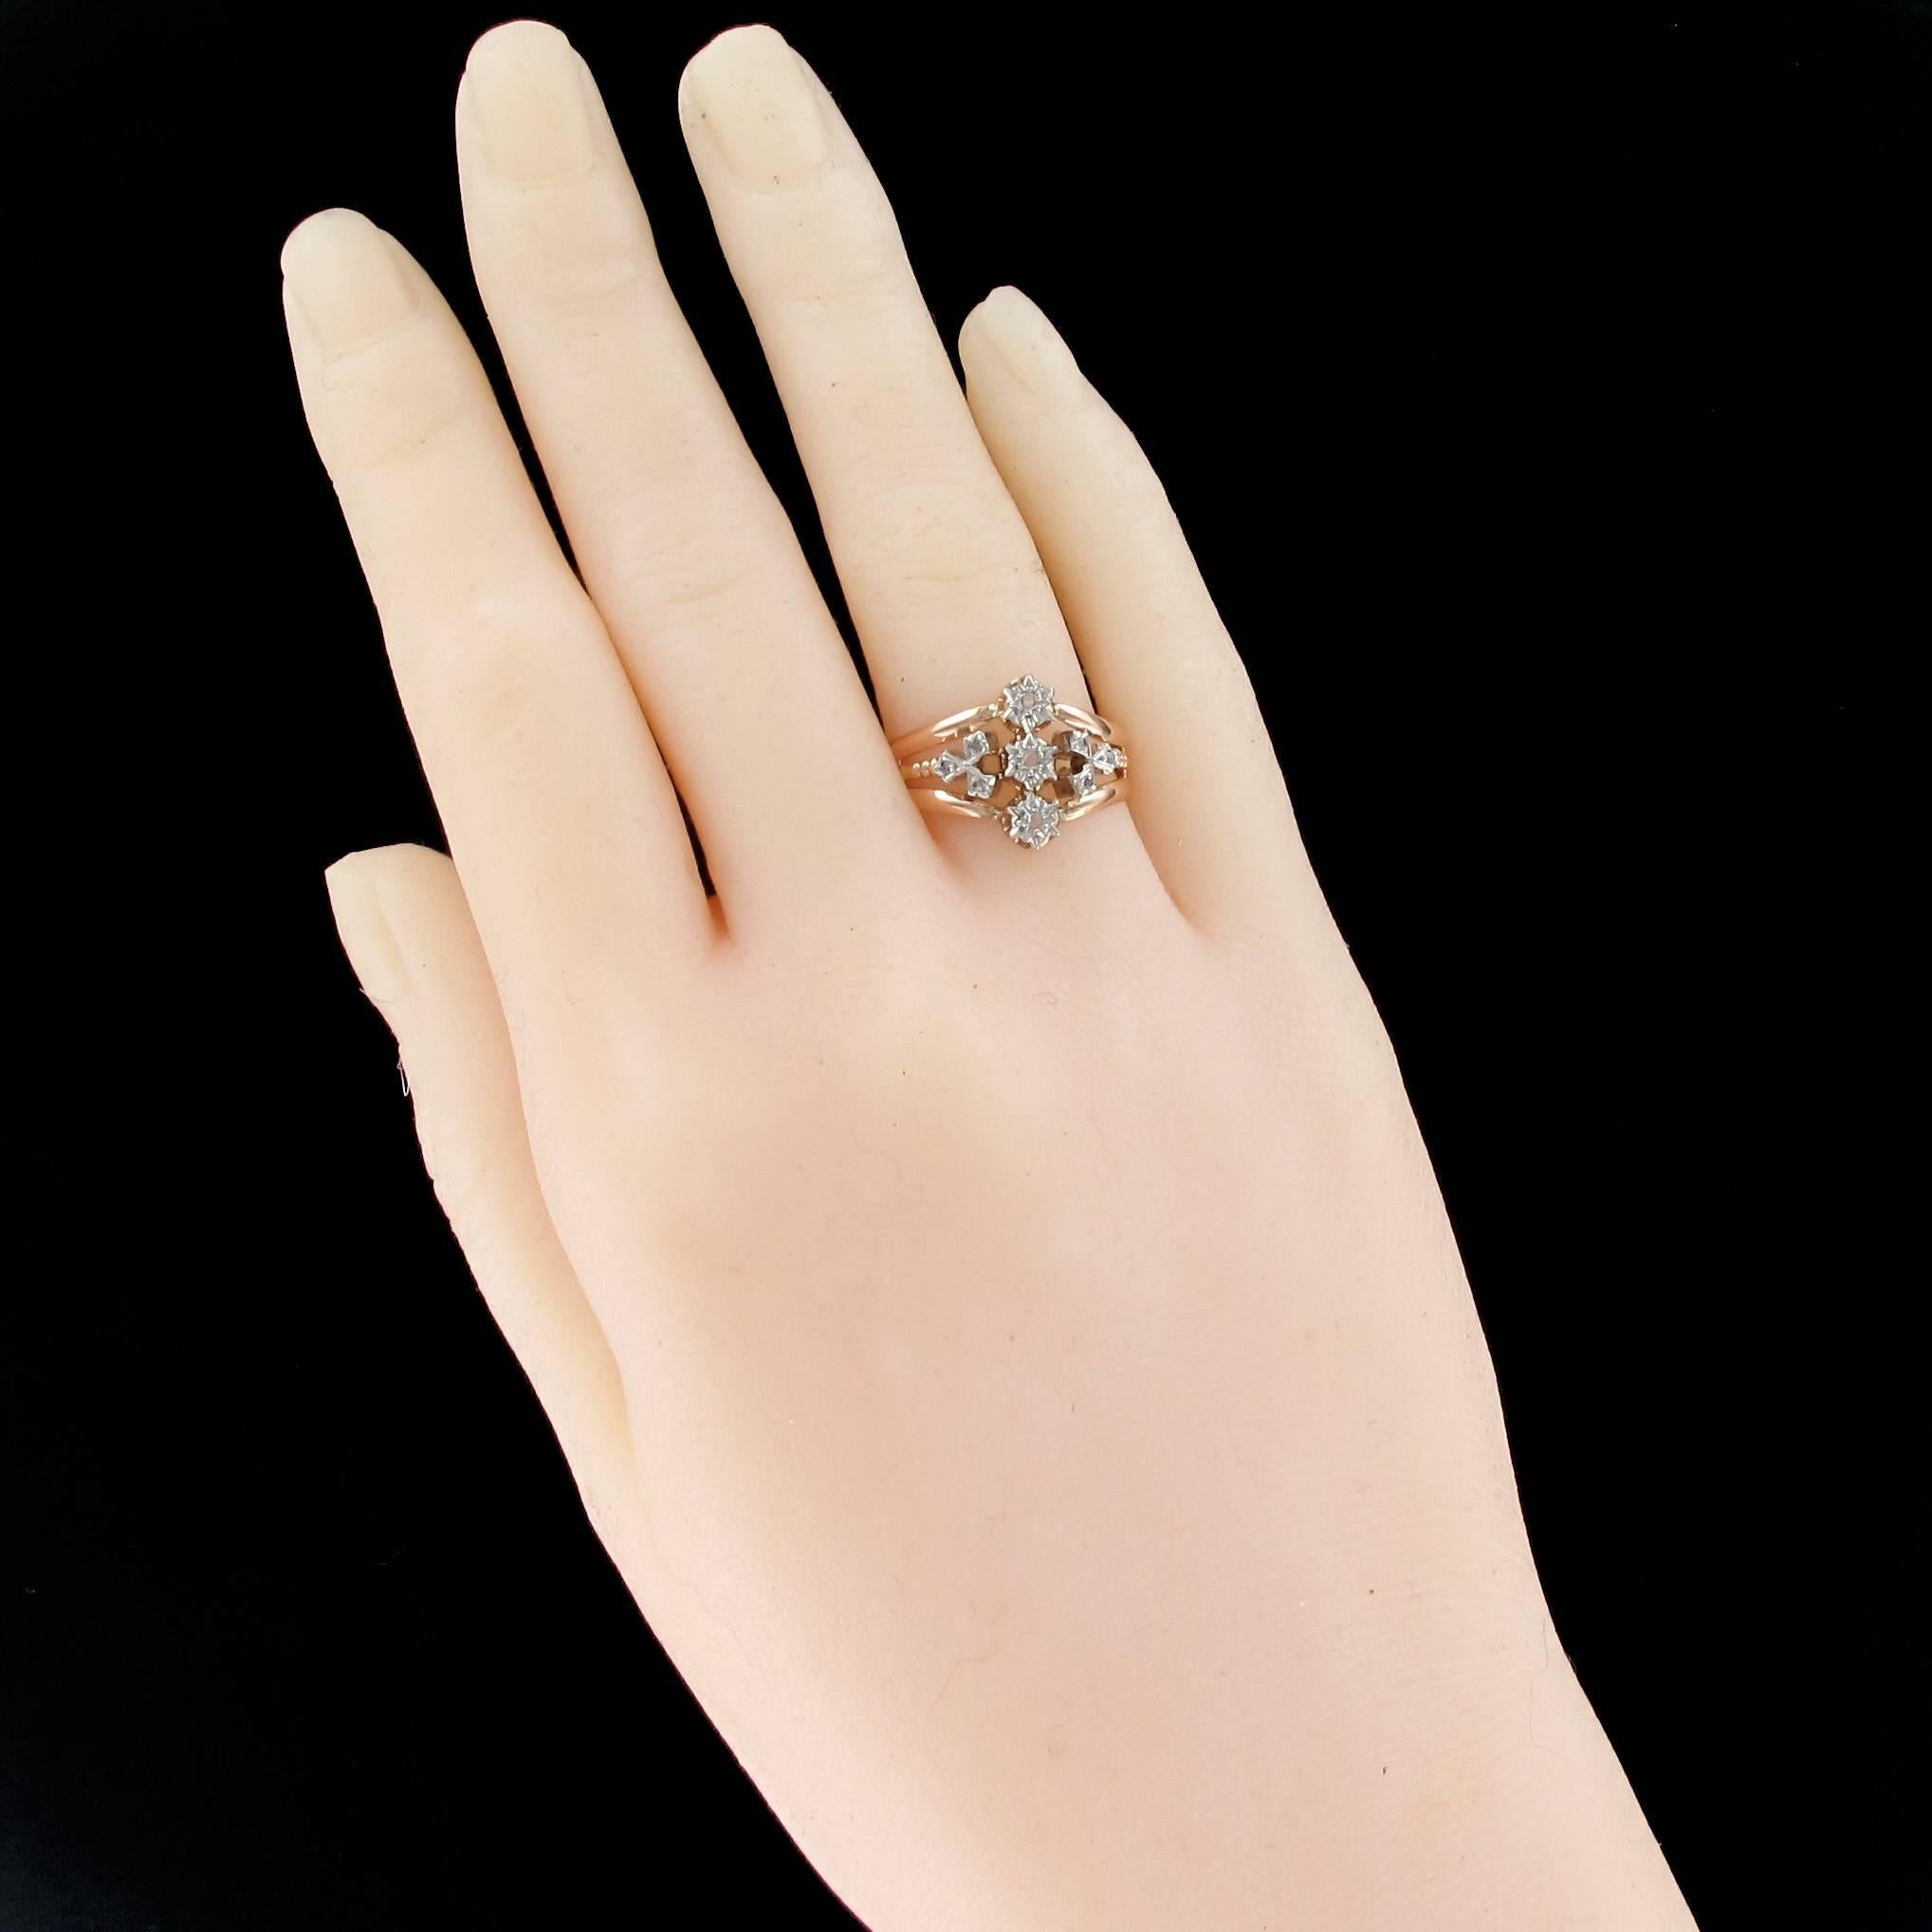 Ring in 18 carats rose gold.

This lovely antique ring is set on top of a line of 3 rose cut diamonds on star-set. On both sides, a 3-leaf clover is set with 3 rose cut diamonds. The start of the ring is formed of 3 gold threads which join at the